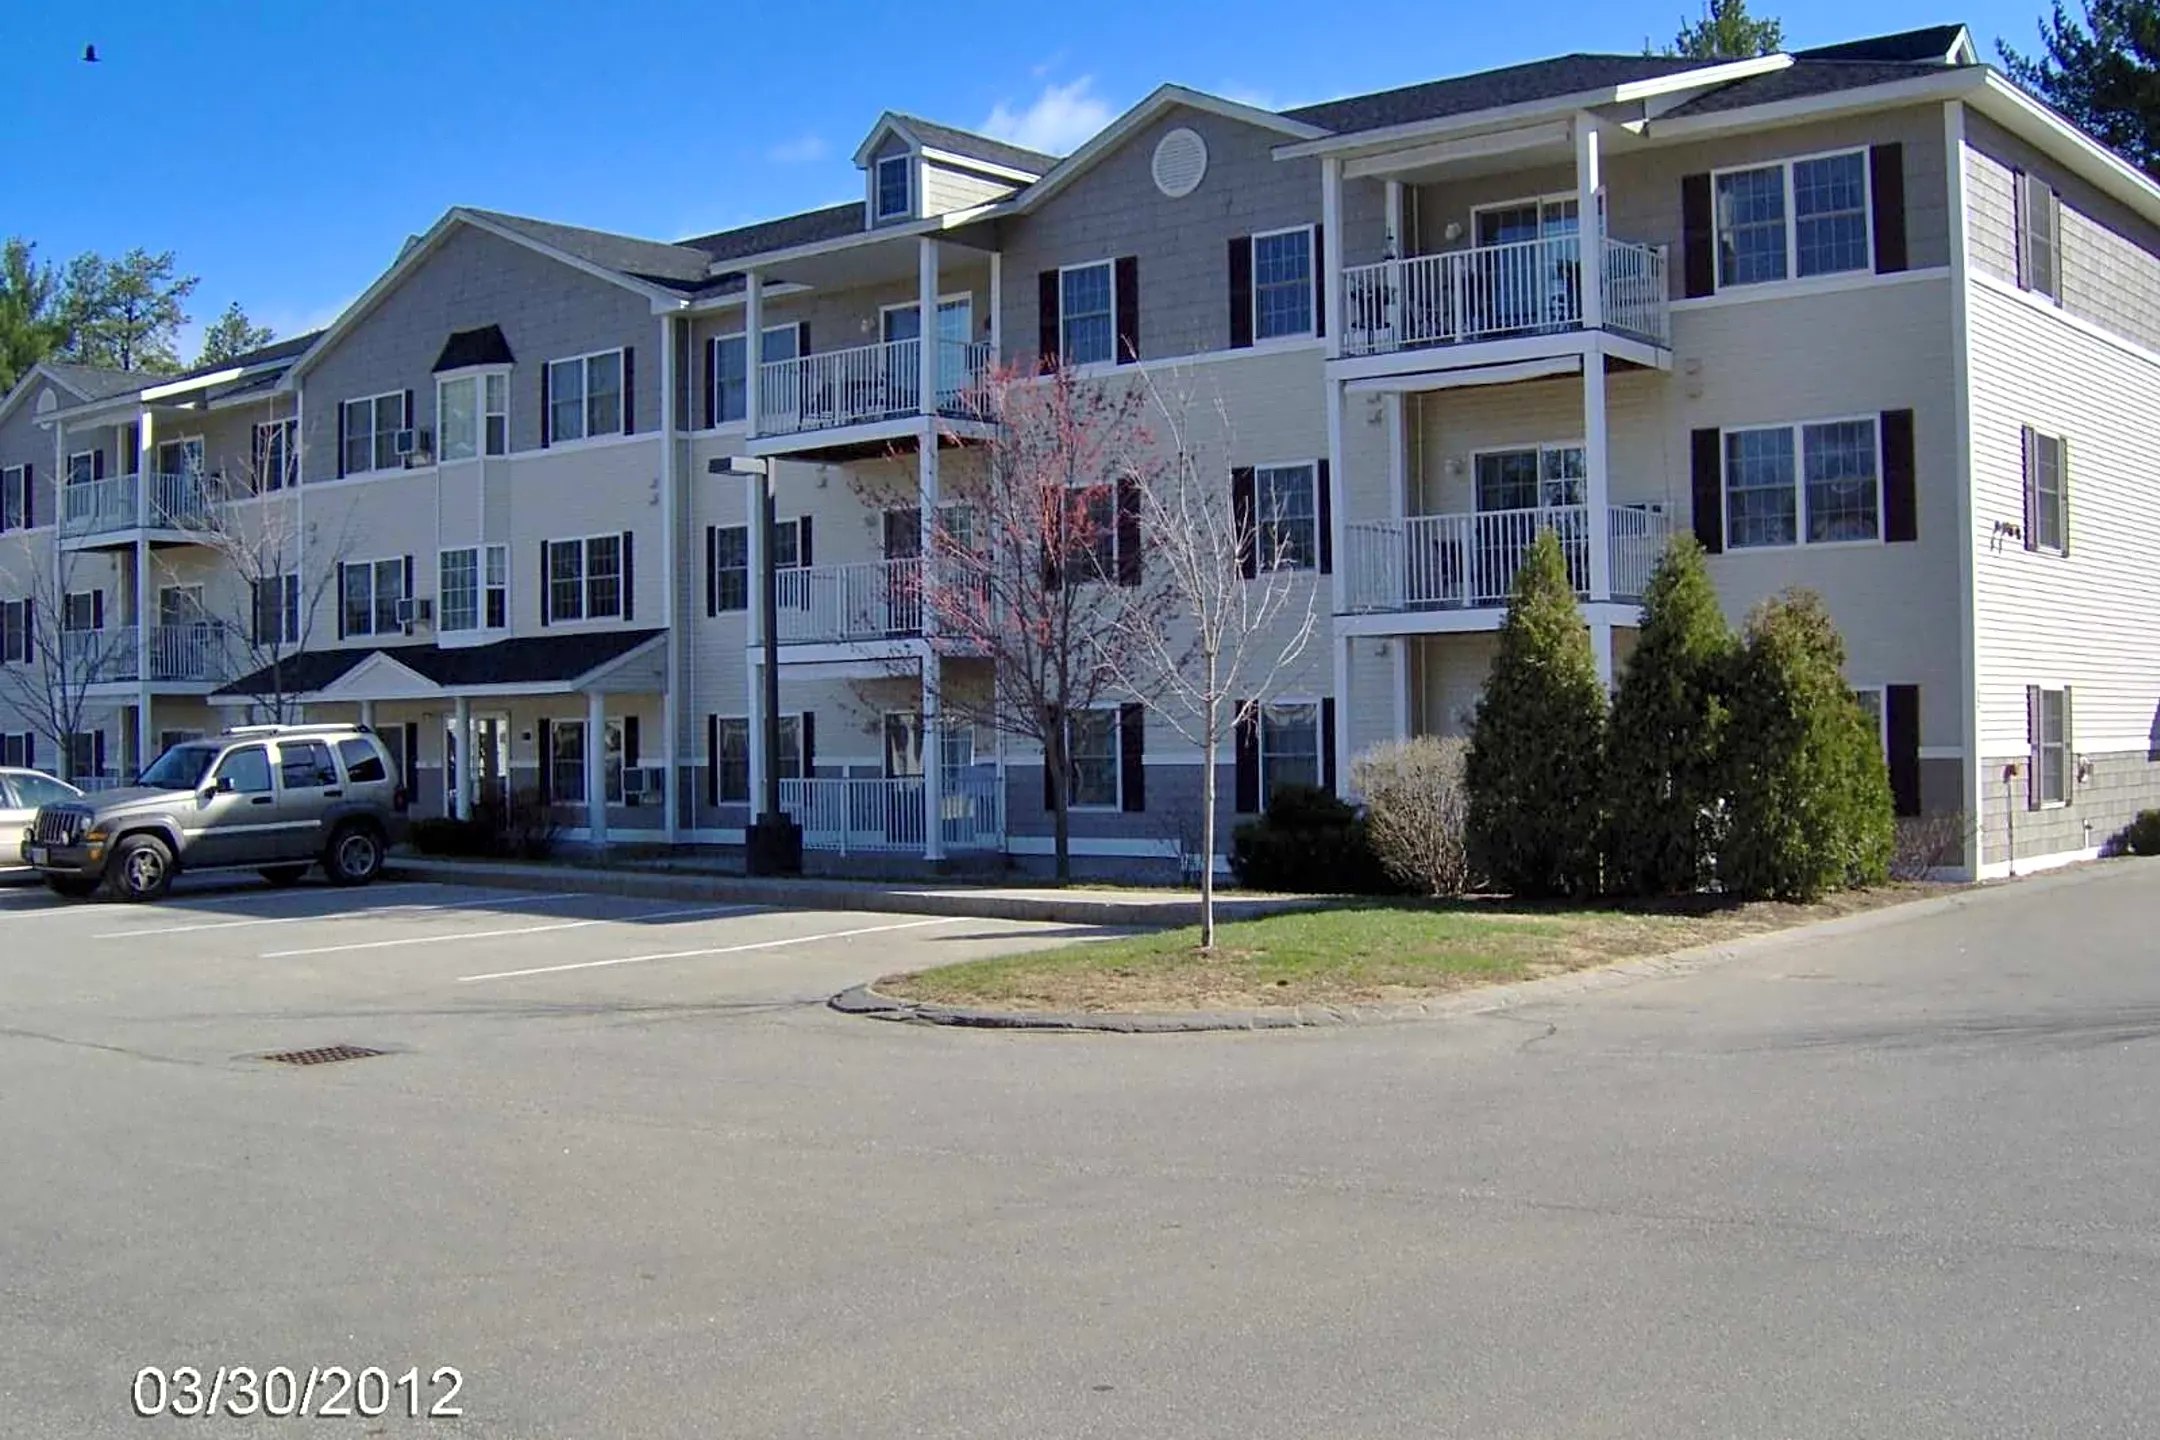 Building - CenterStone Residence - Concord, NH